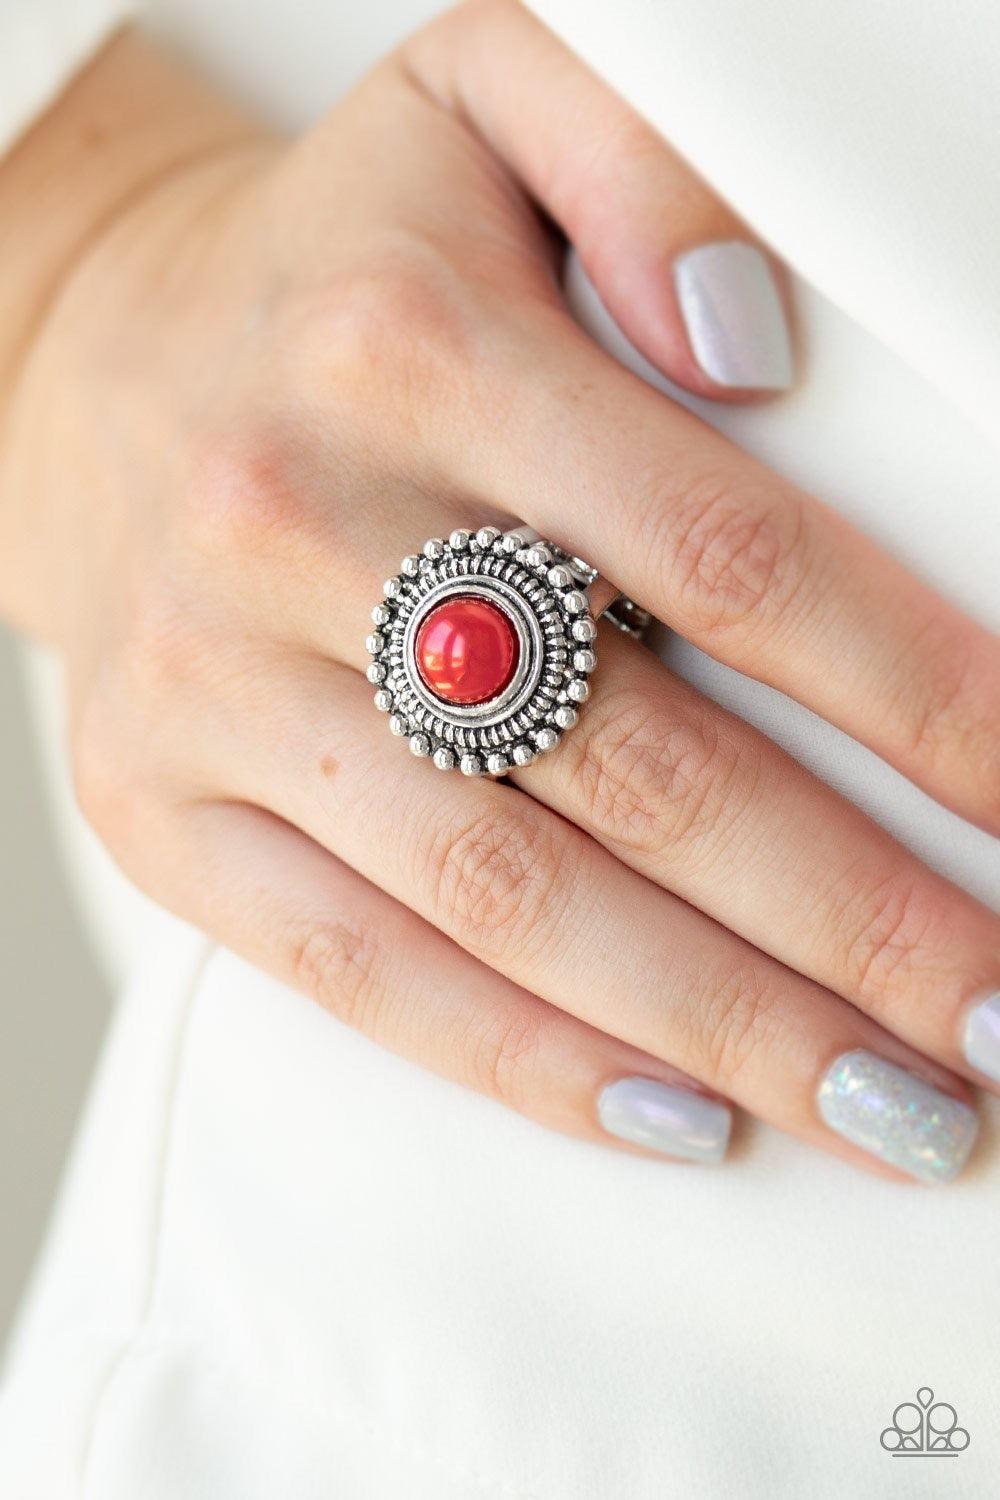 Paparazzi Accessories Regal Royal - Red A roung red bead is pressed into the center of a textured silver frame radiating in a ring of silver studs for a whimsical pop of color. Features a stretchy band for a flexible fit. Jewelry